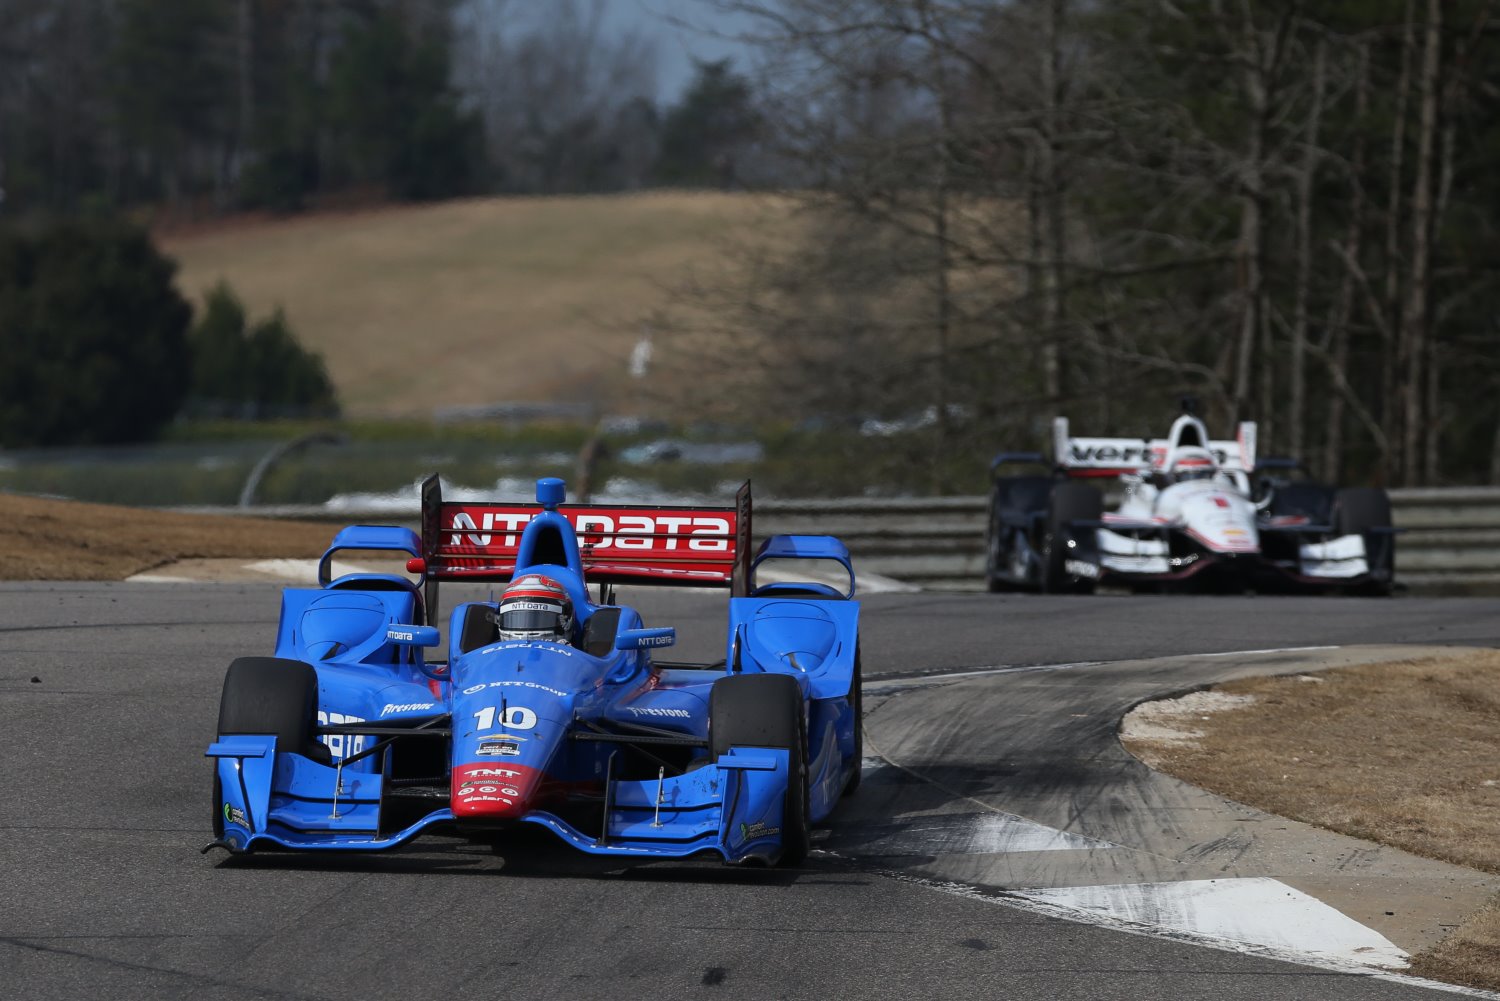 Kanaan leads Power in the Chevy Kit-Car